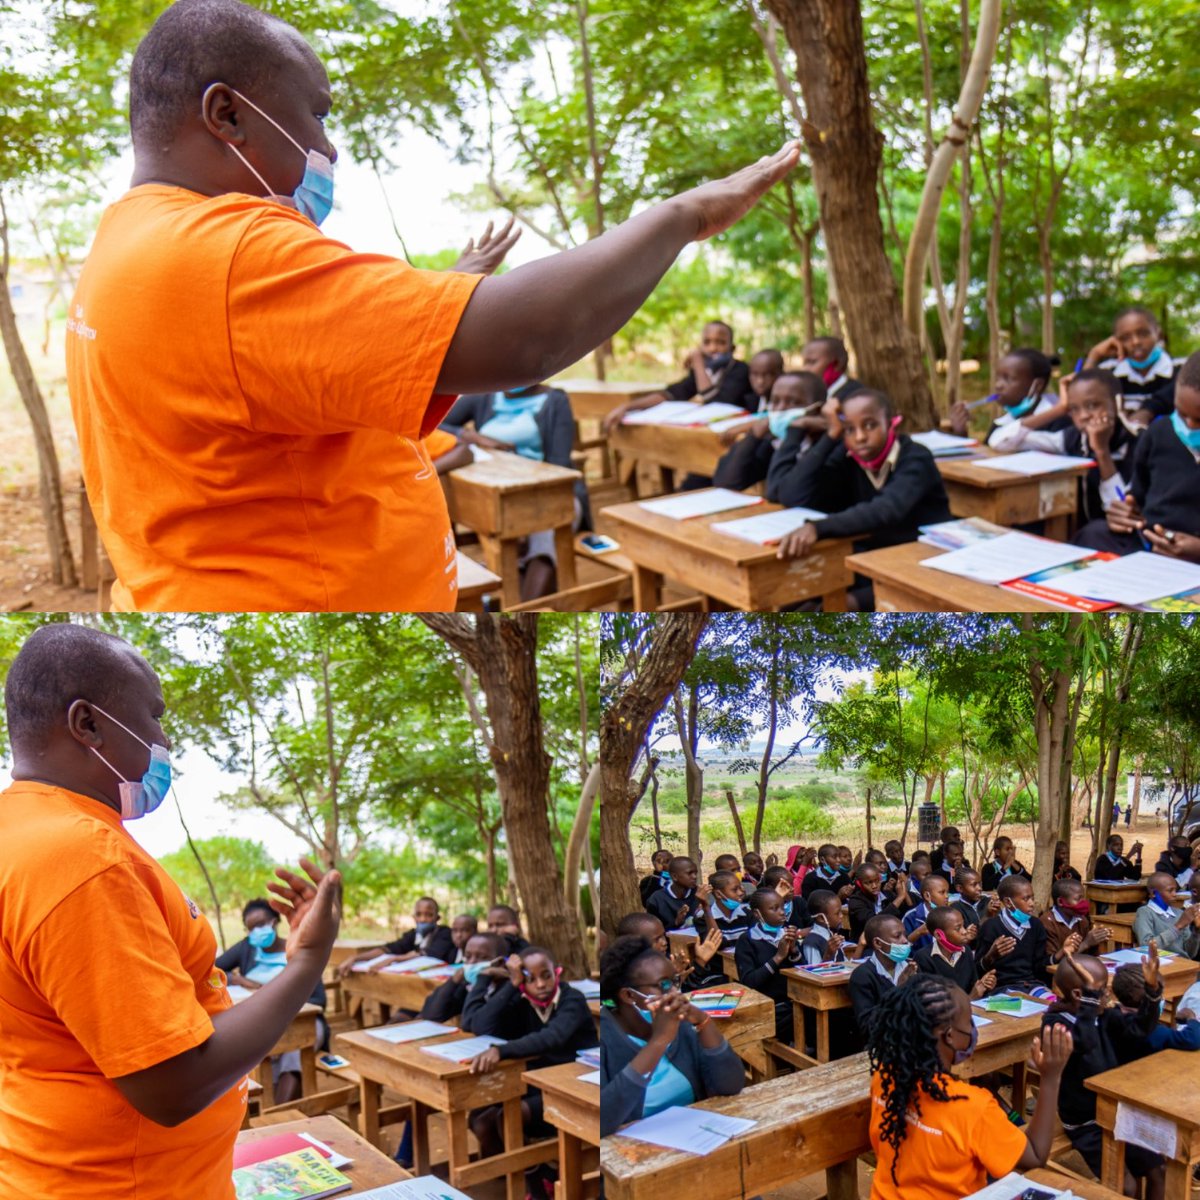 Launched Mentorship program @ Samuli Primary School. 
Equiping students with non-academically taught skills &  exposing them to unlimited opportunities available after school. #Mentorshipmatters #reachback #payitforward #digitalmentorship #careeradvice #MentoringWorks #coaching